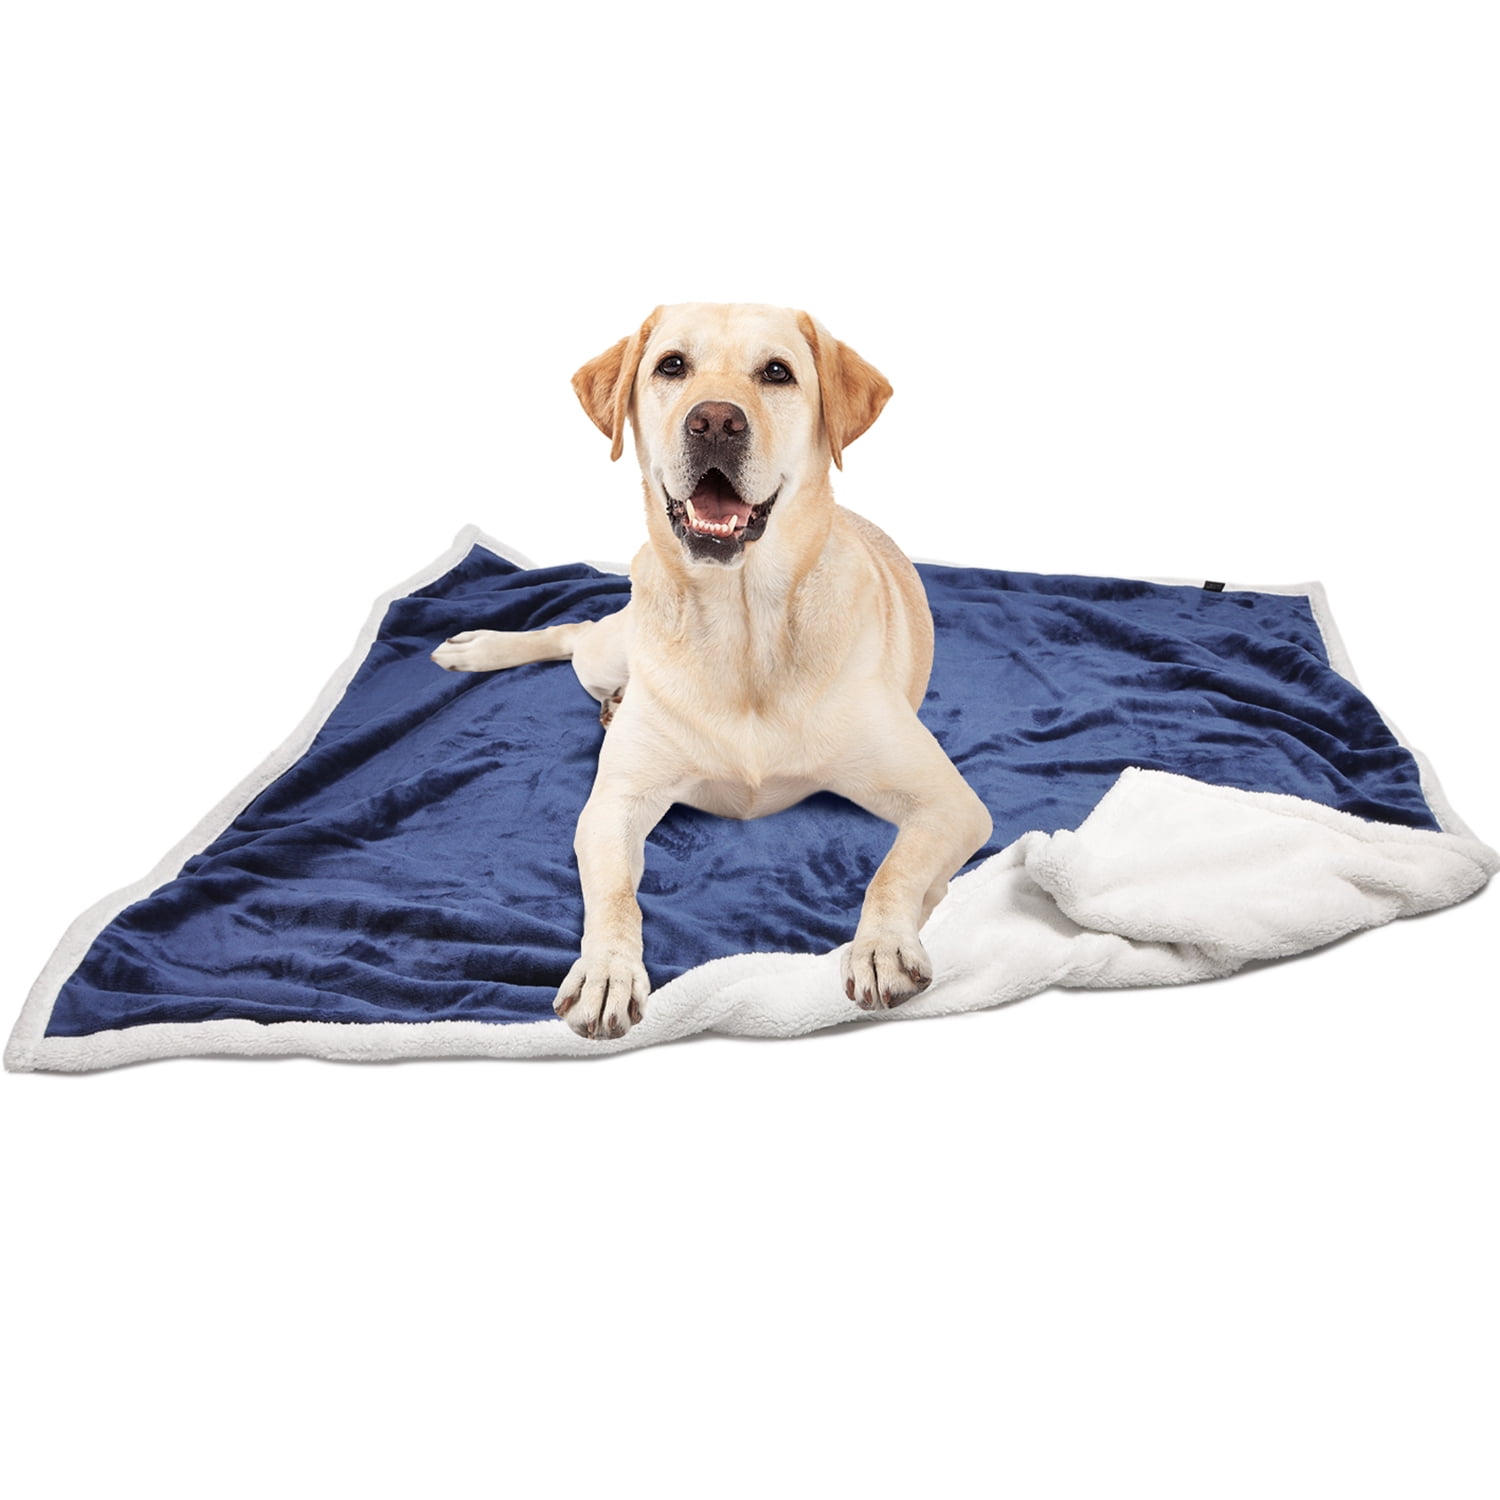 Large Dog Blanket, Super Soft Fluffy Sherpa Fleece Dog Couch Blankets and  Throws for Large Medium Small Dogs Puppy Doggy Pet Cats, Blue - Walmart.com